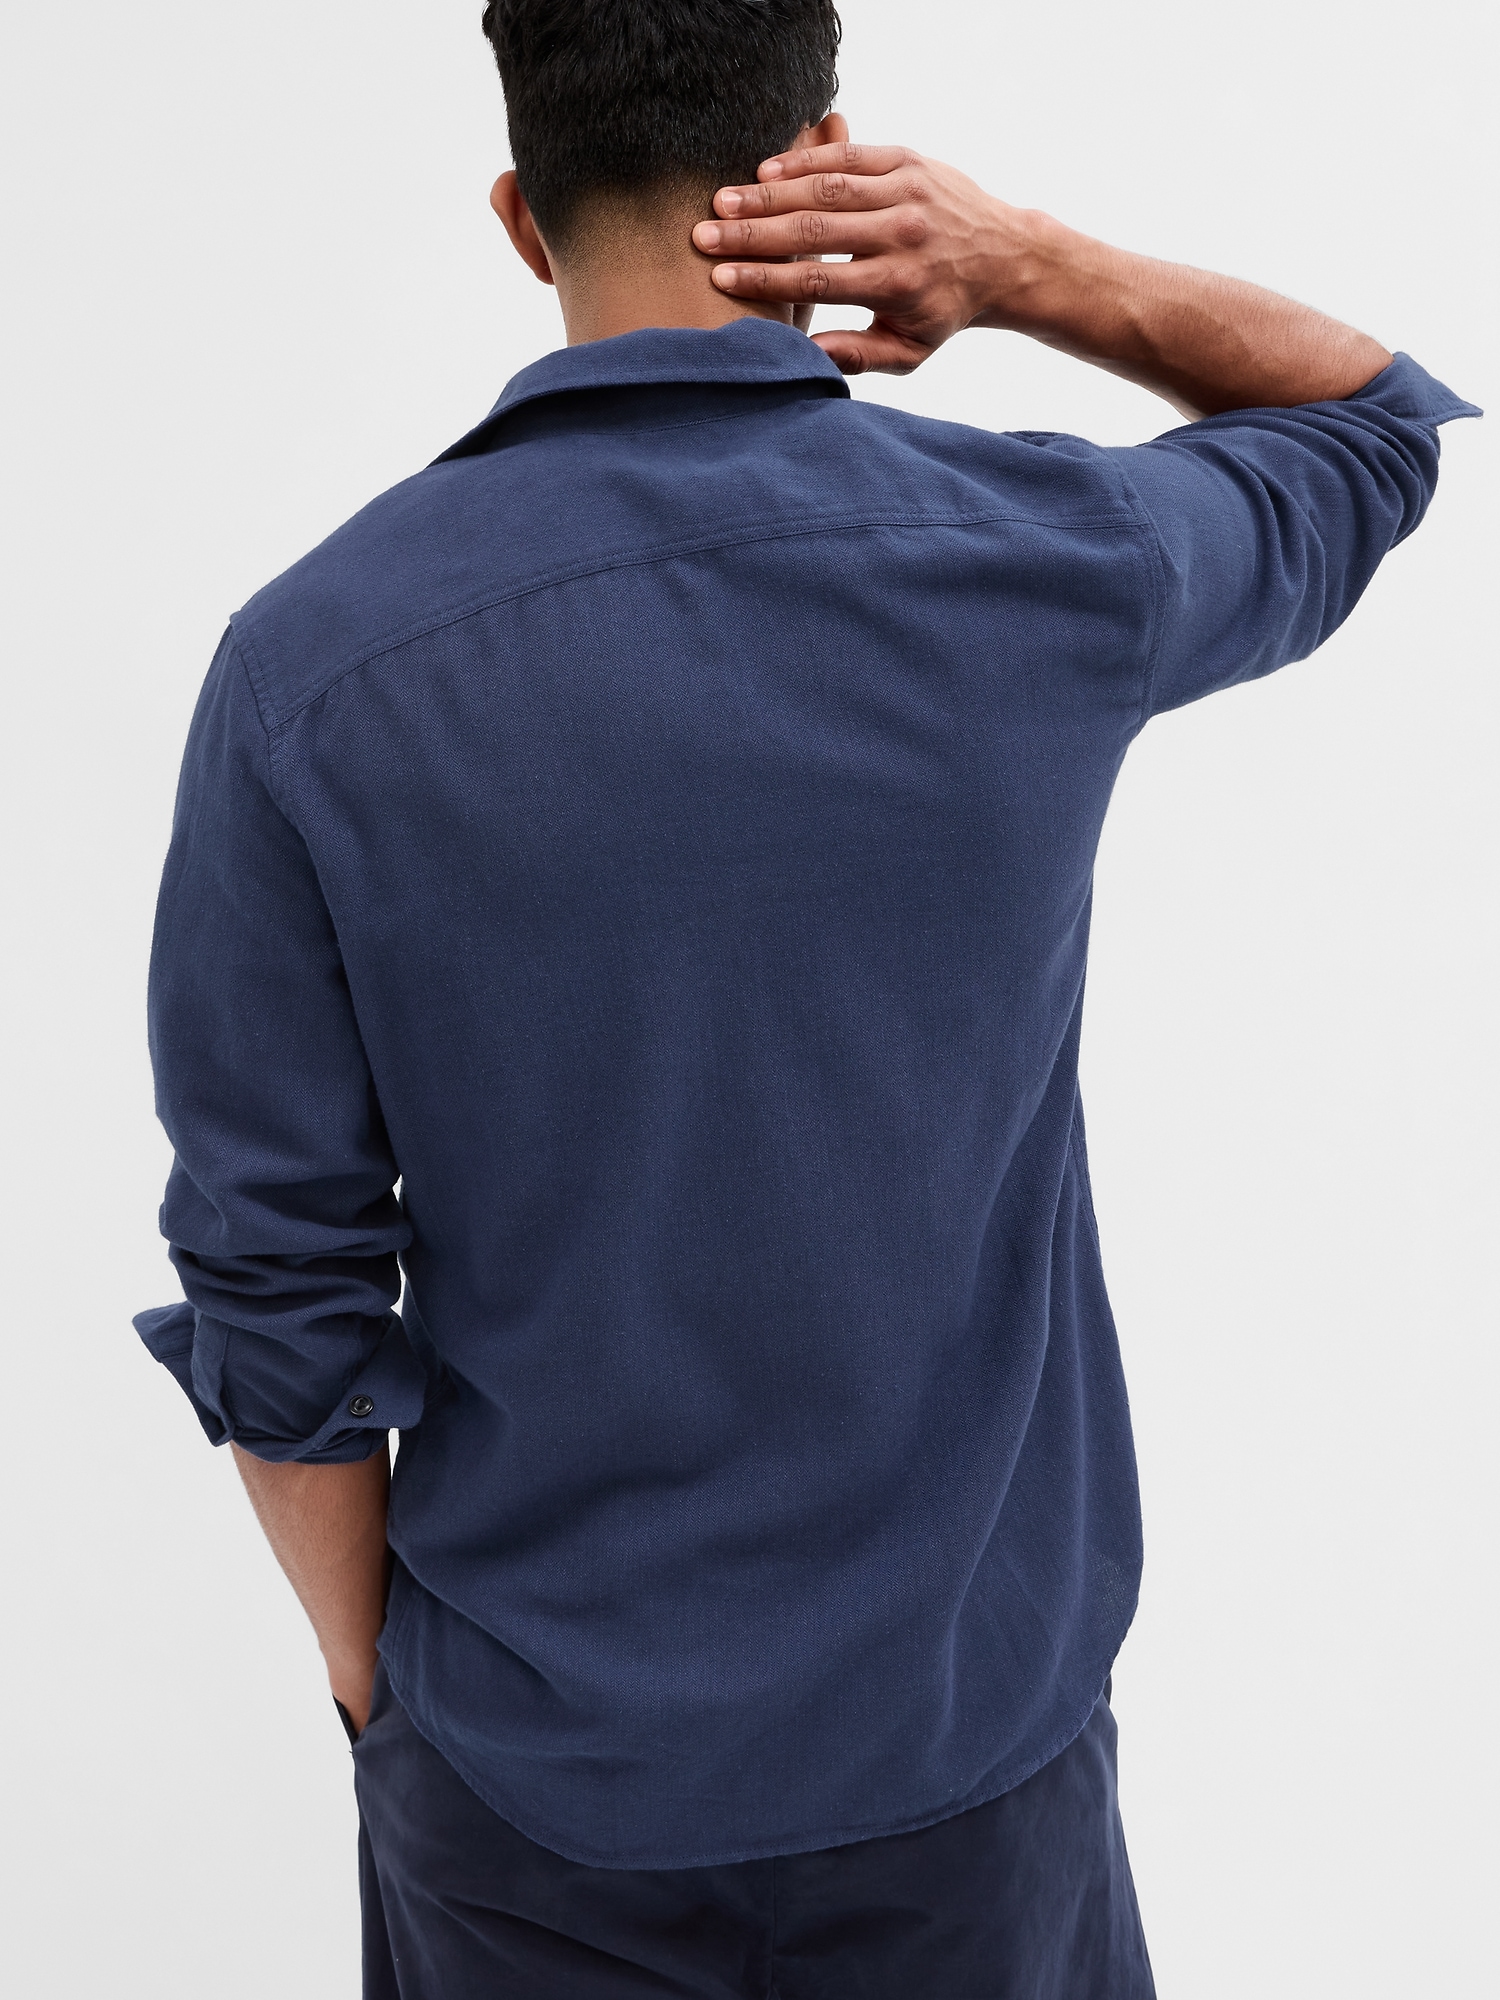 Utility Shirt in Standard Fit | Gap Factory